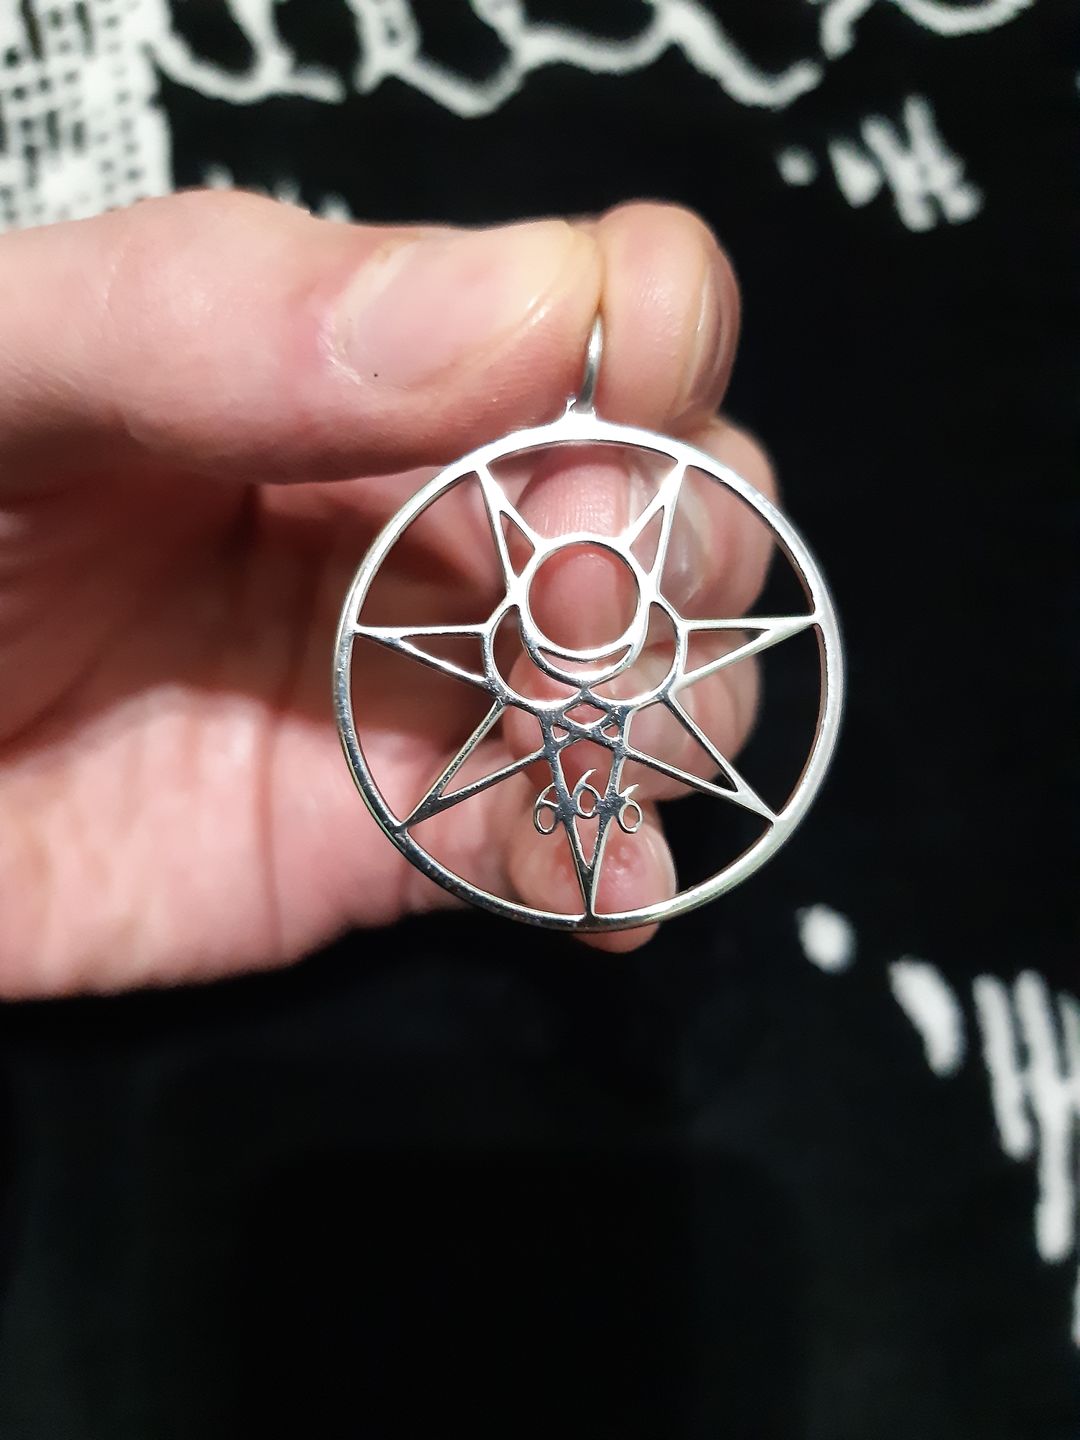 Daniel M. review of Mark of the Beast Symbol Necklace
